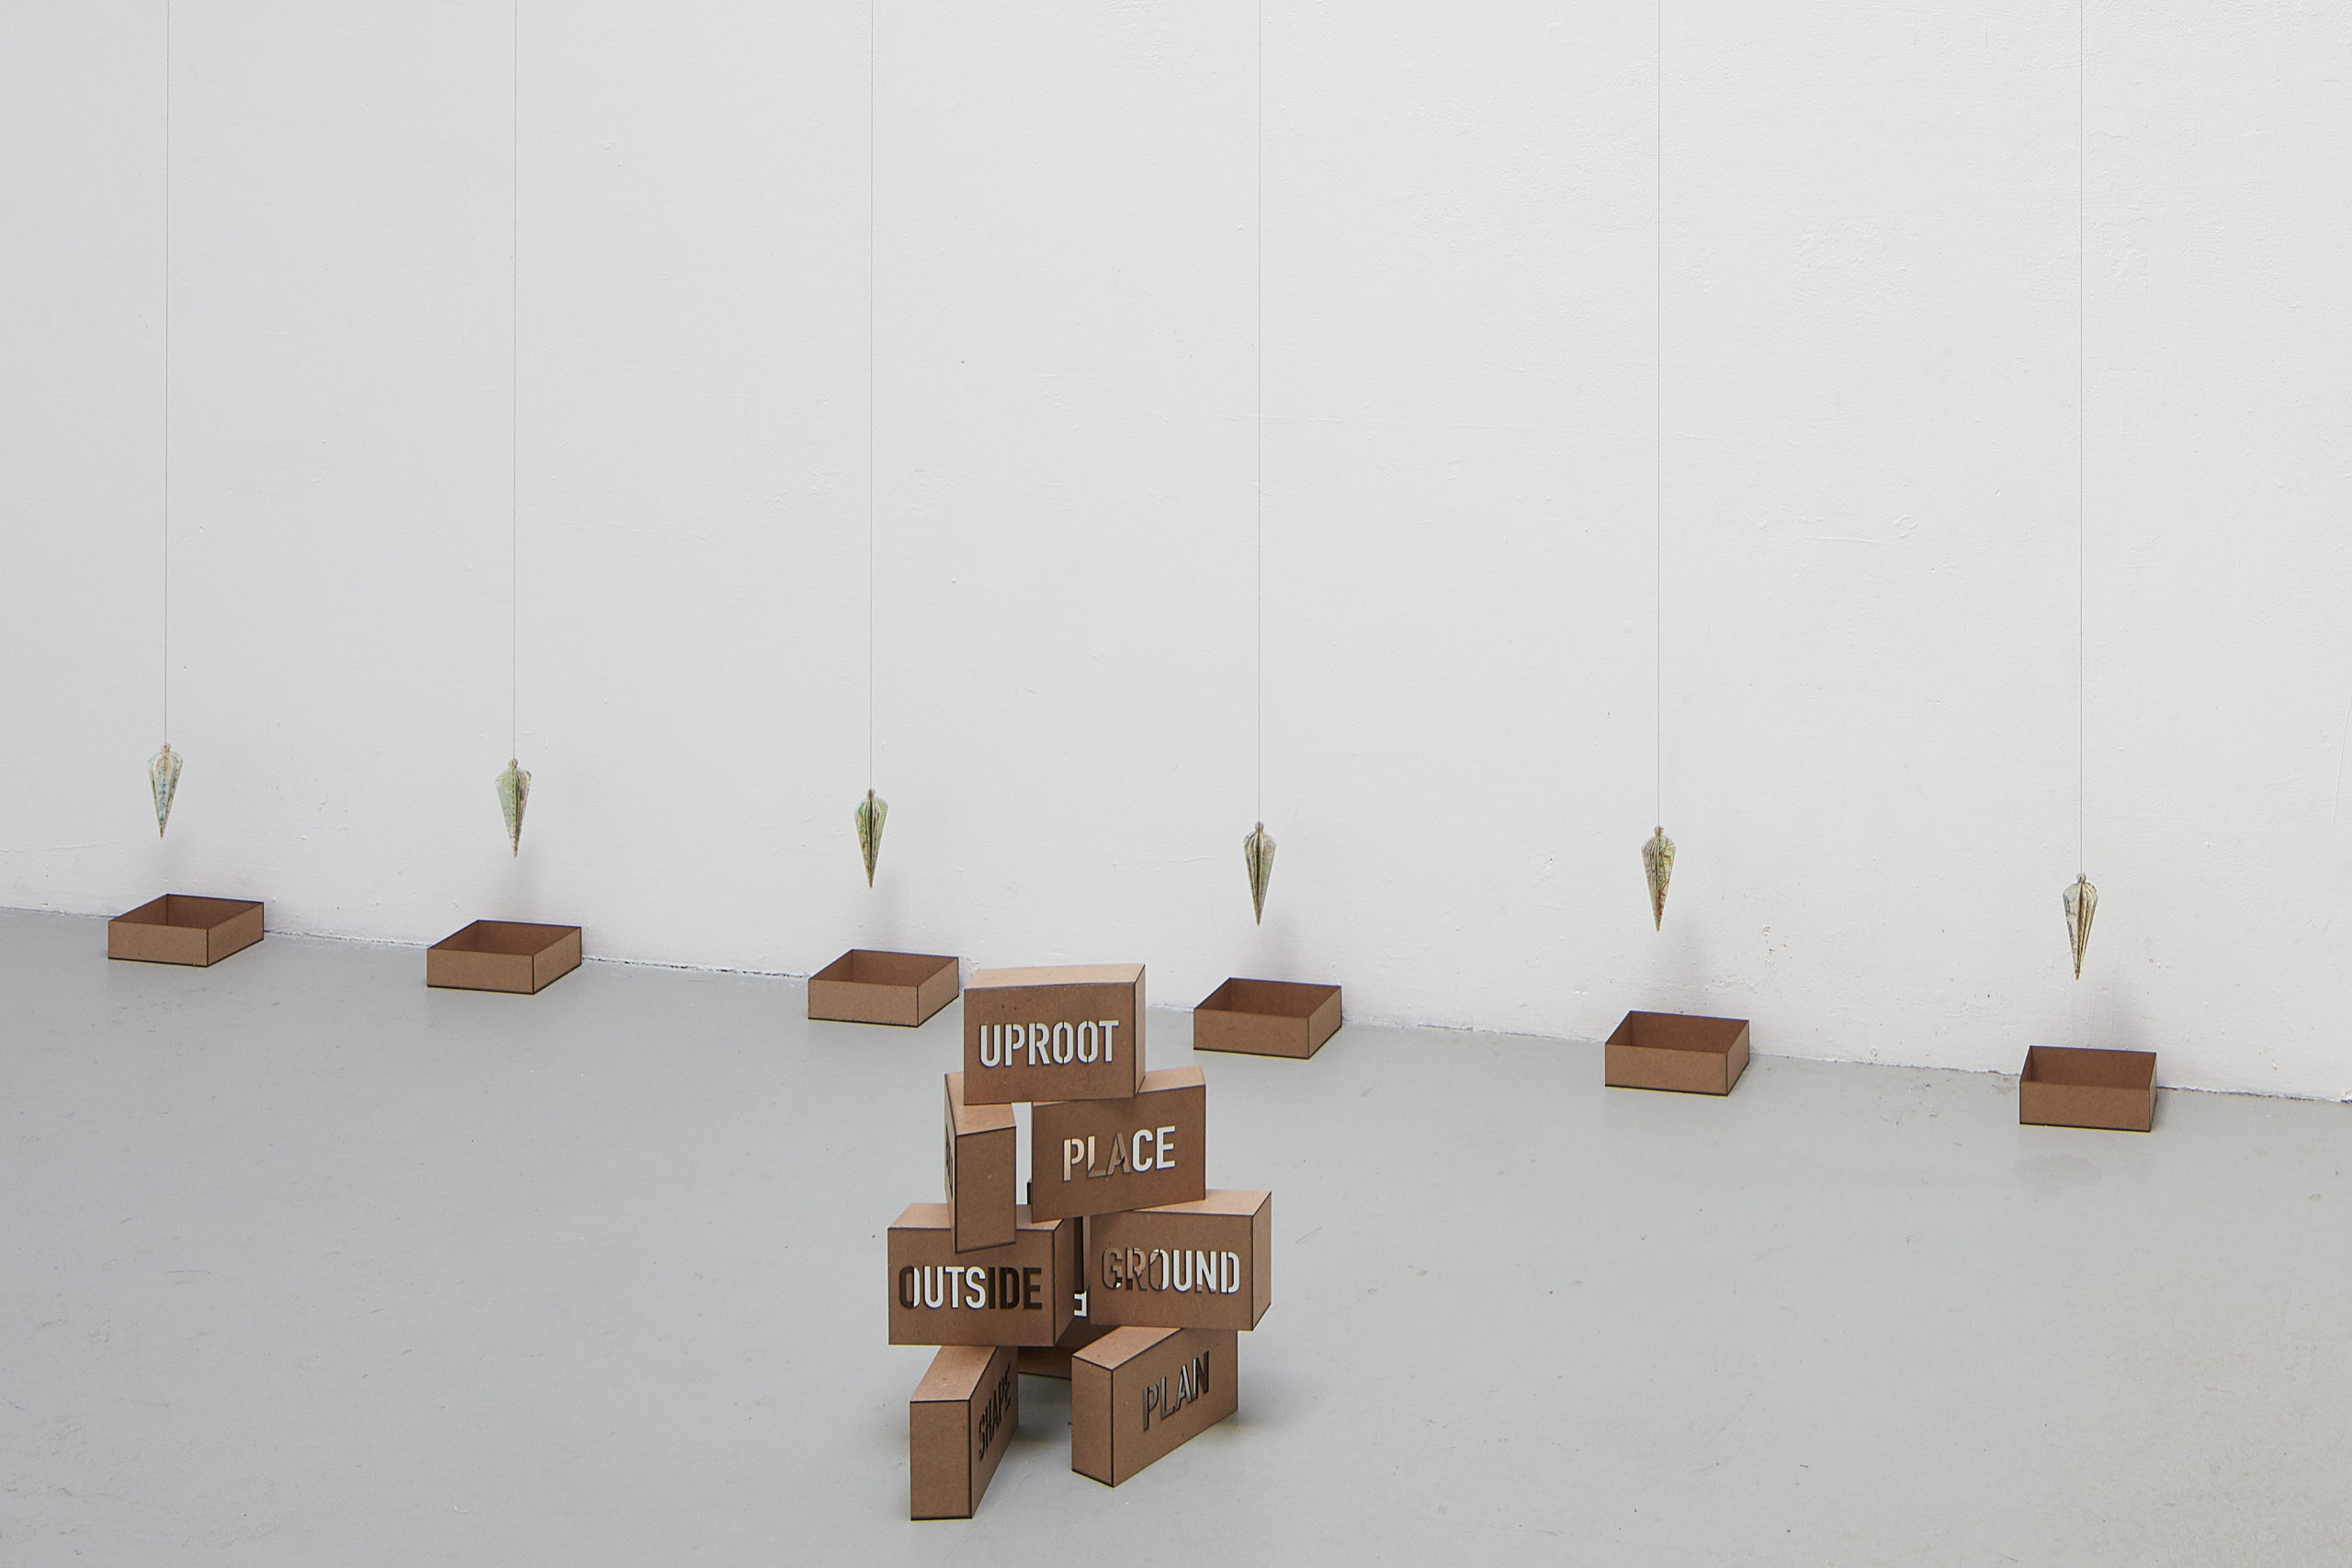 Installation of artwork that resembles a stavk of bricks and hanging plumb lines